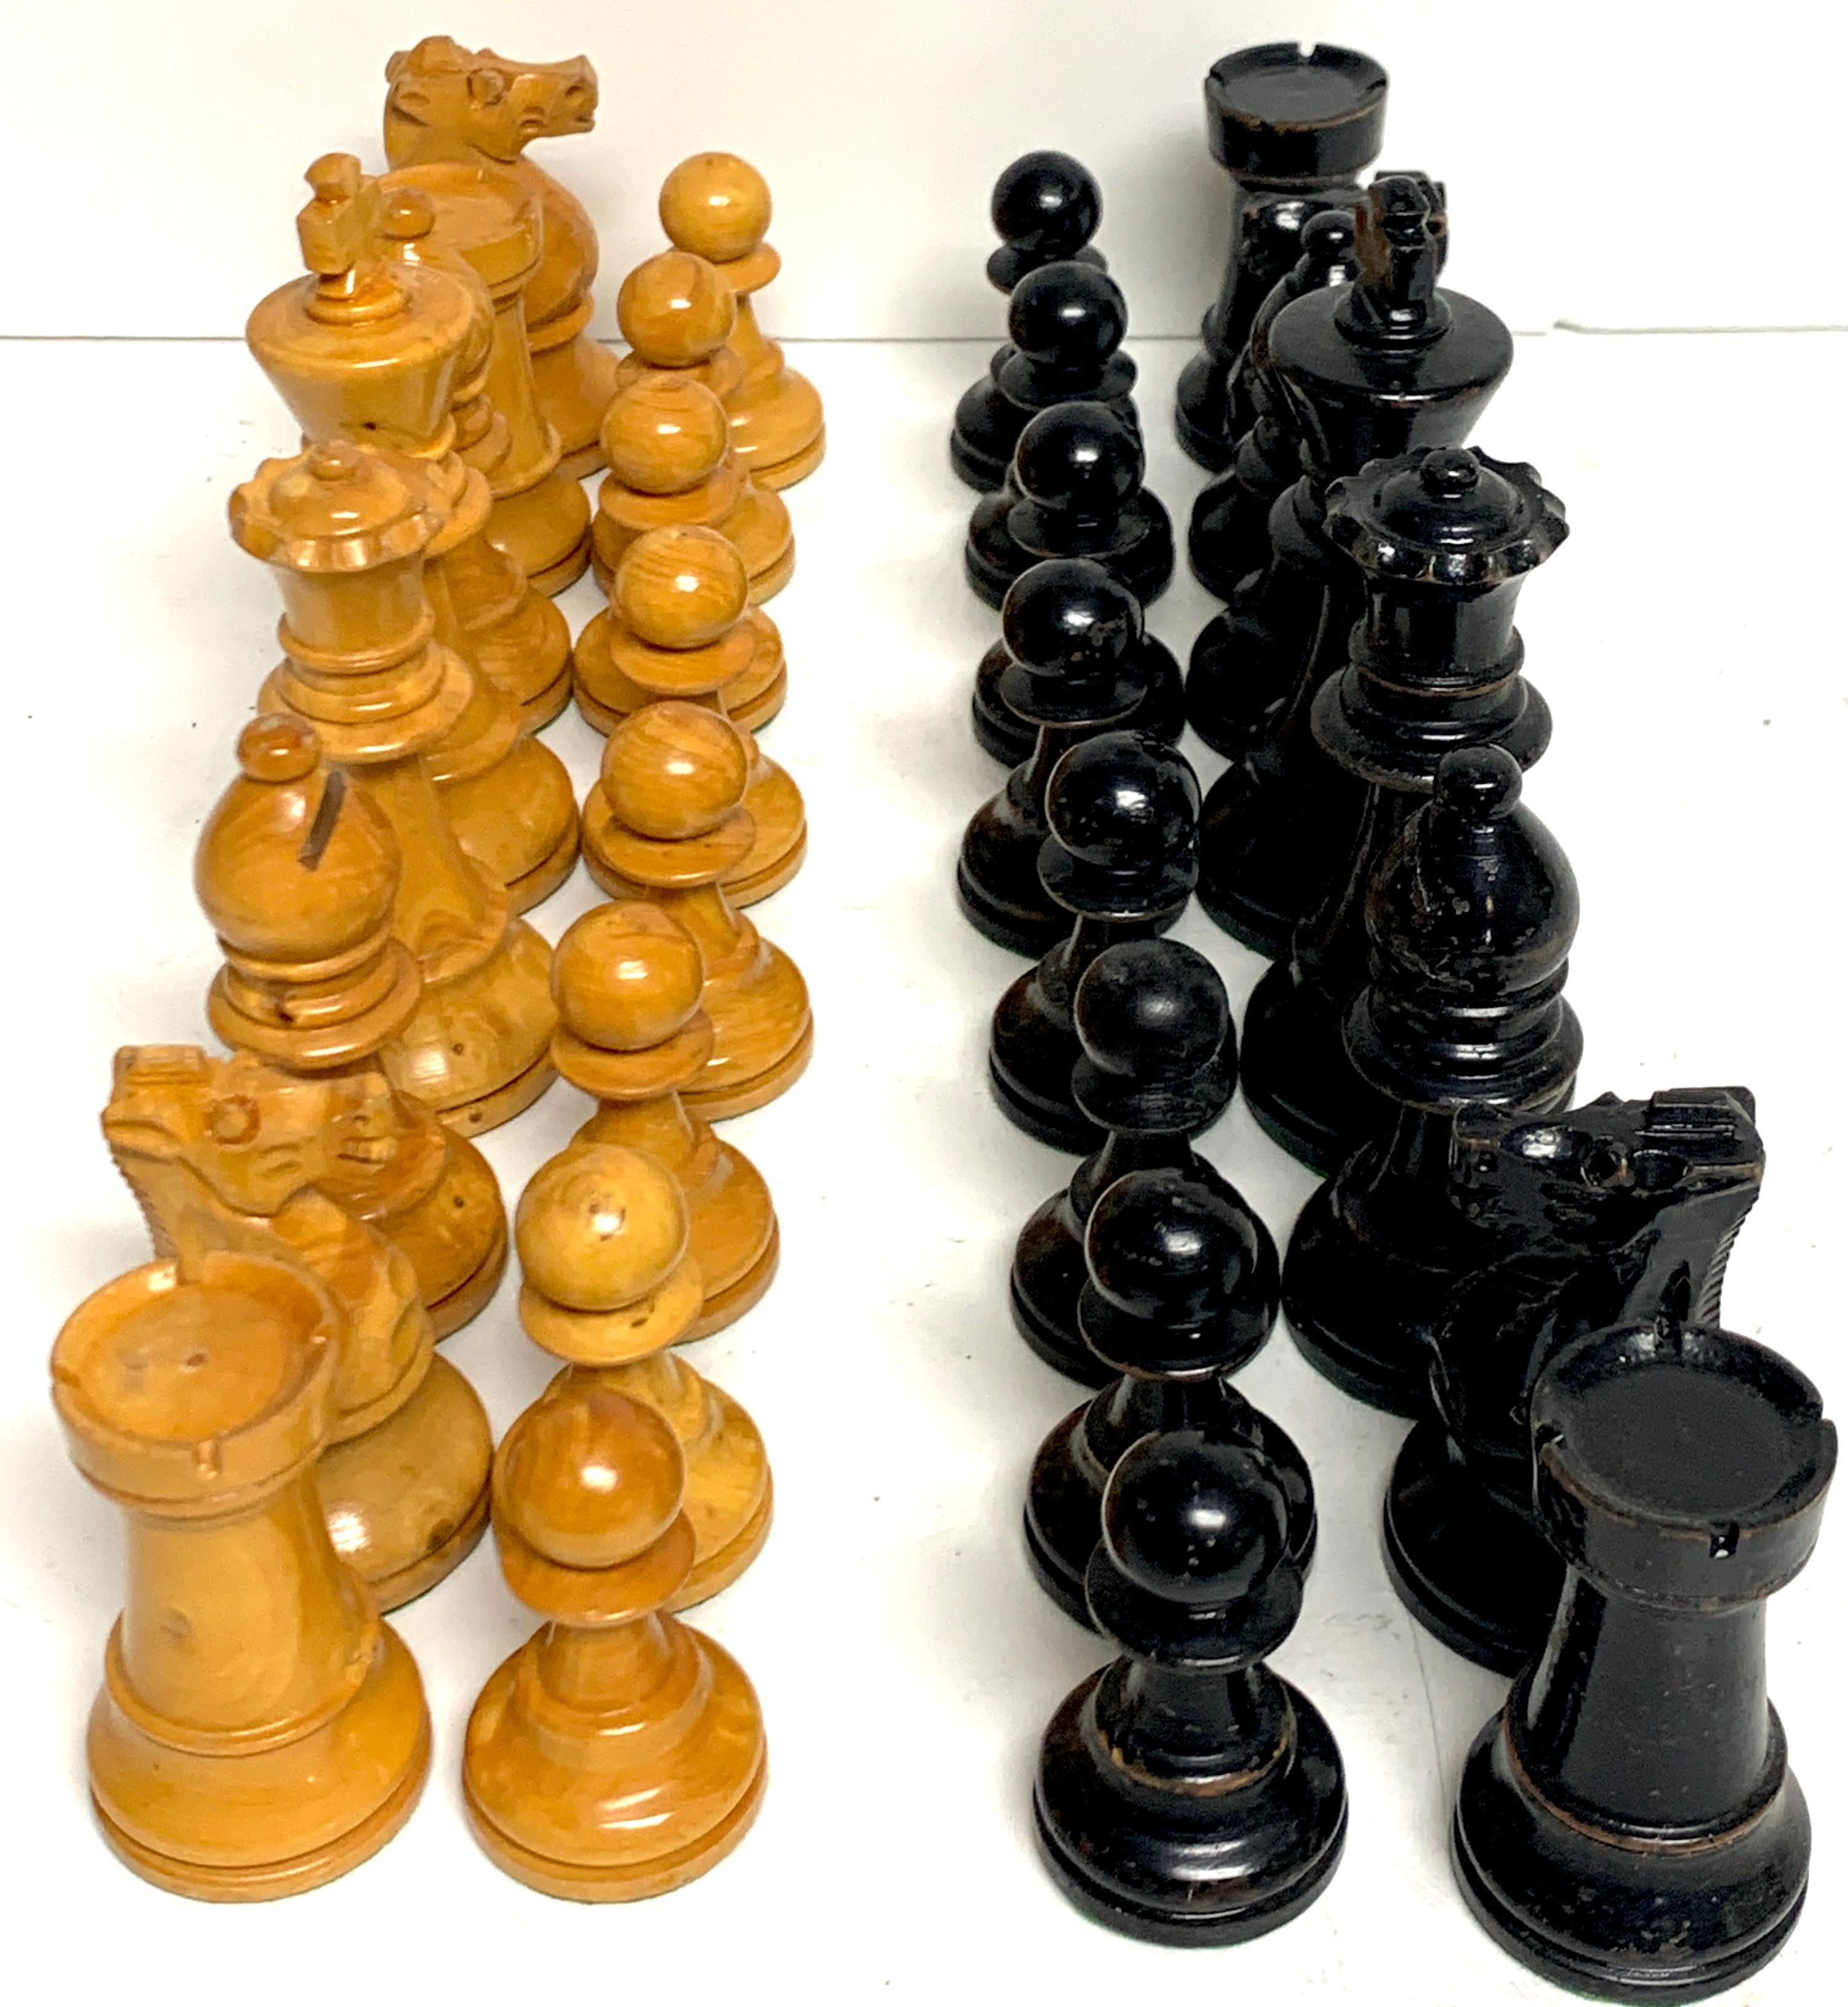 English Victorian carved satinwood and ebonized chess pieces, a complete 32 piece set, subtly carved, nice weight, nice to hold. The tallest piece is 4-inches high.